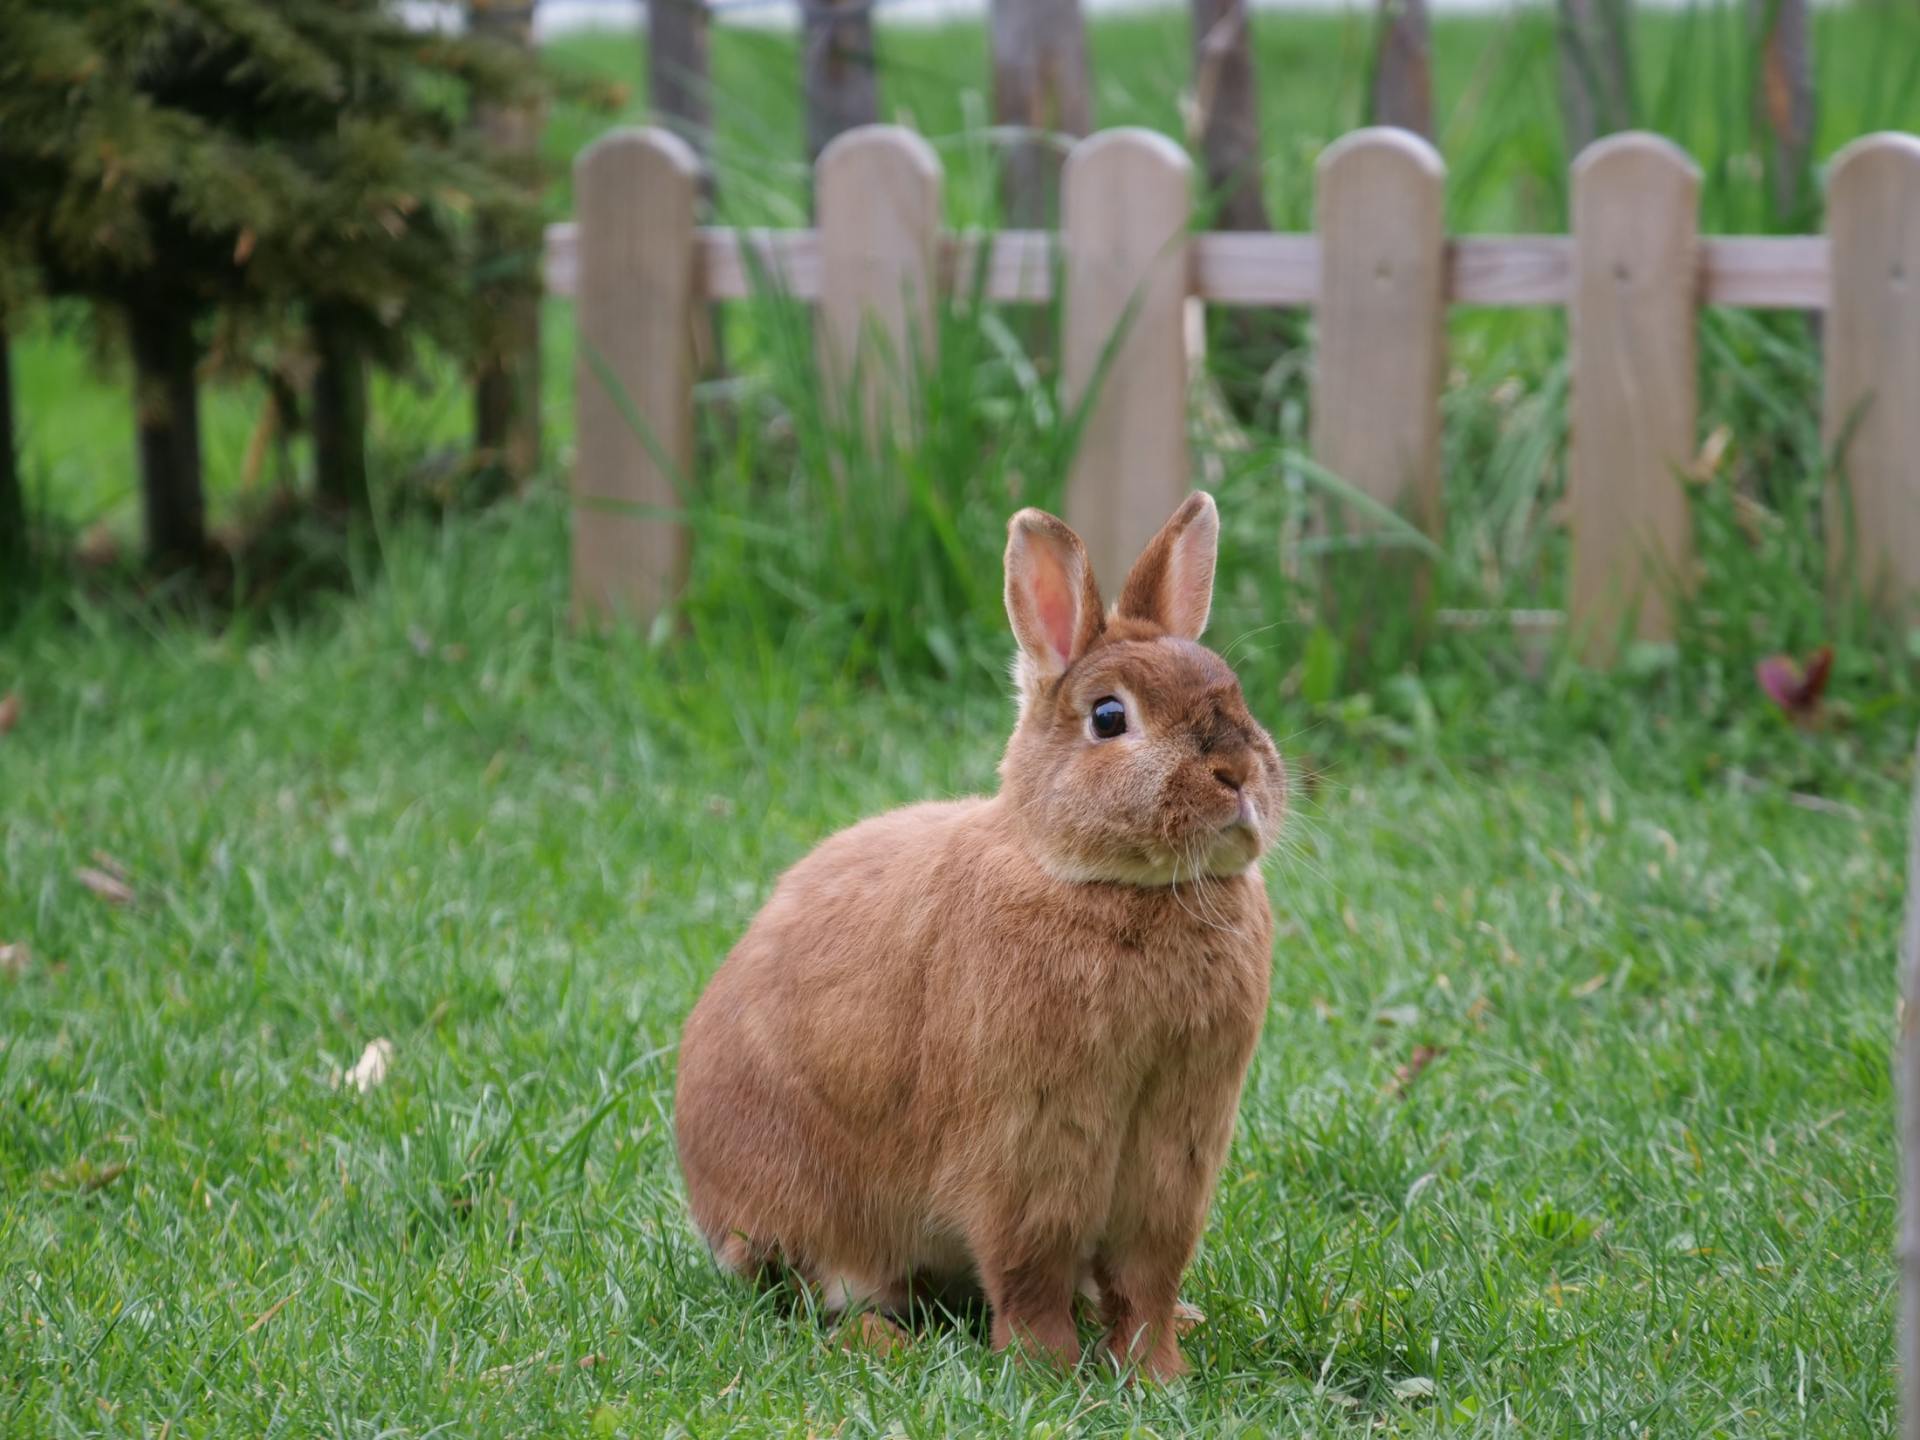 How To Get Rid Of Rabbits In My Backyard